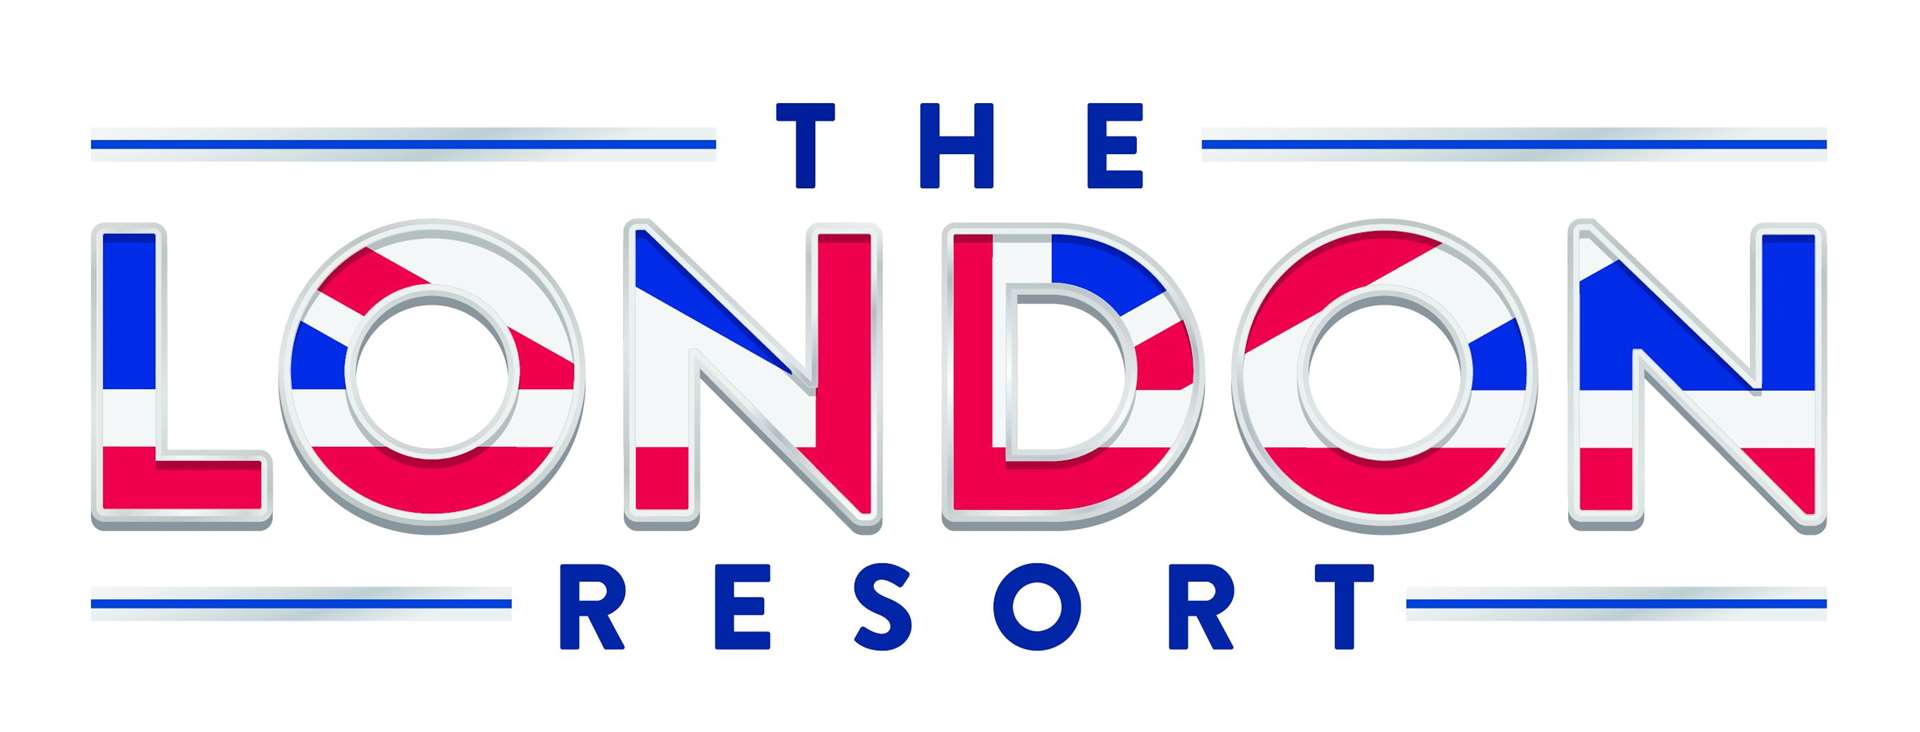 The new logo for The London Resort